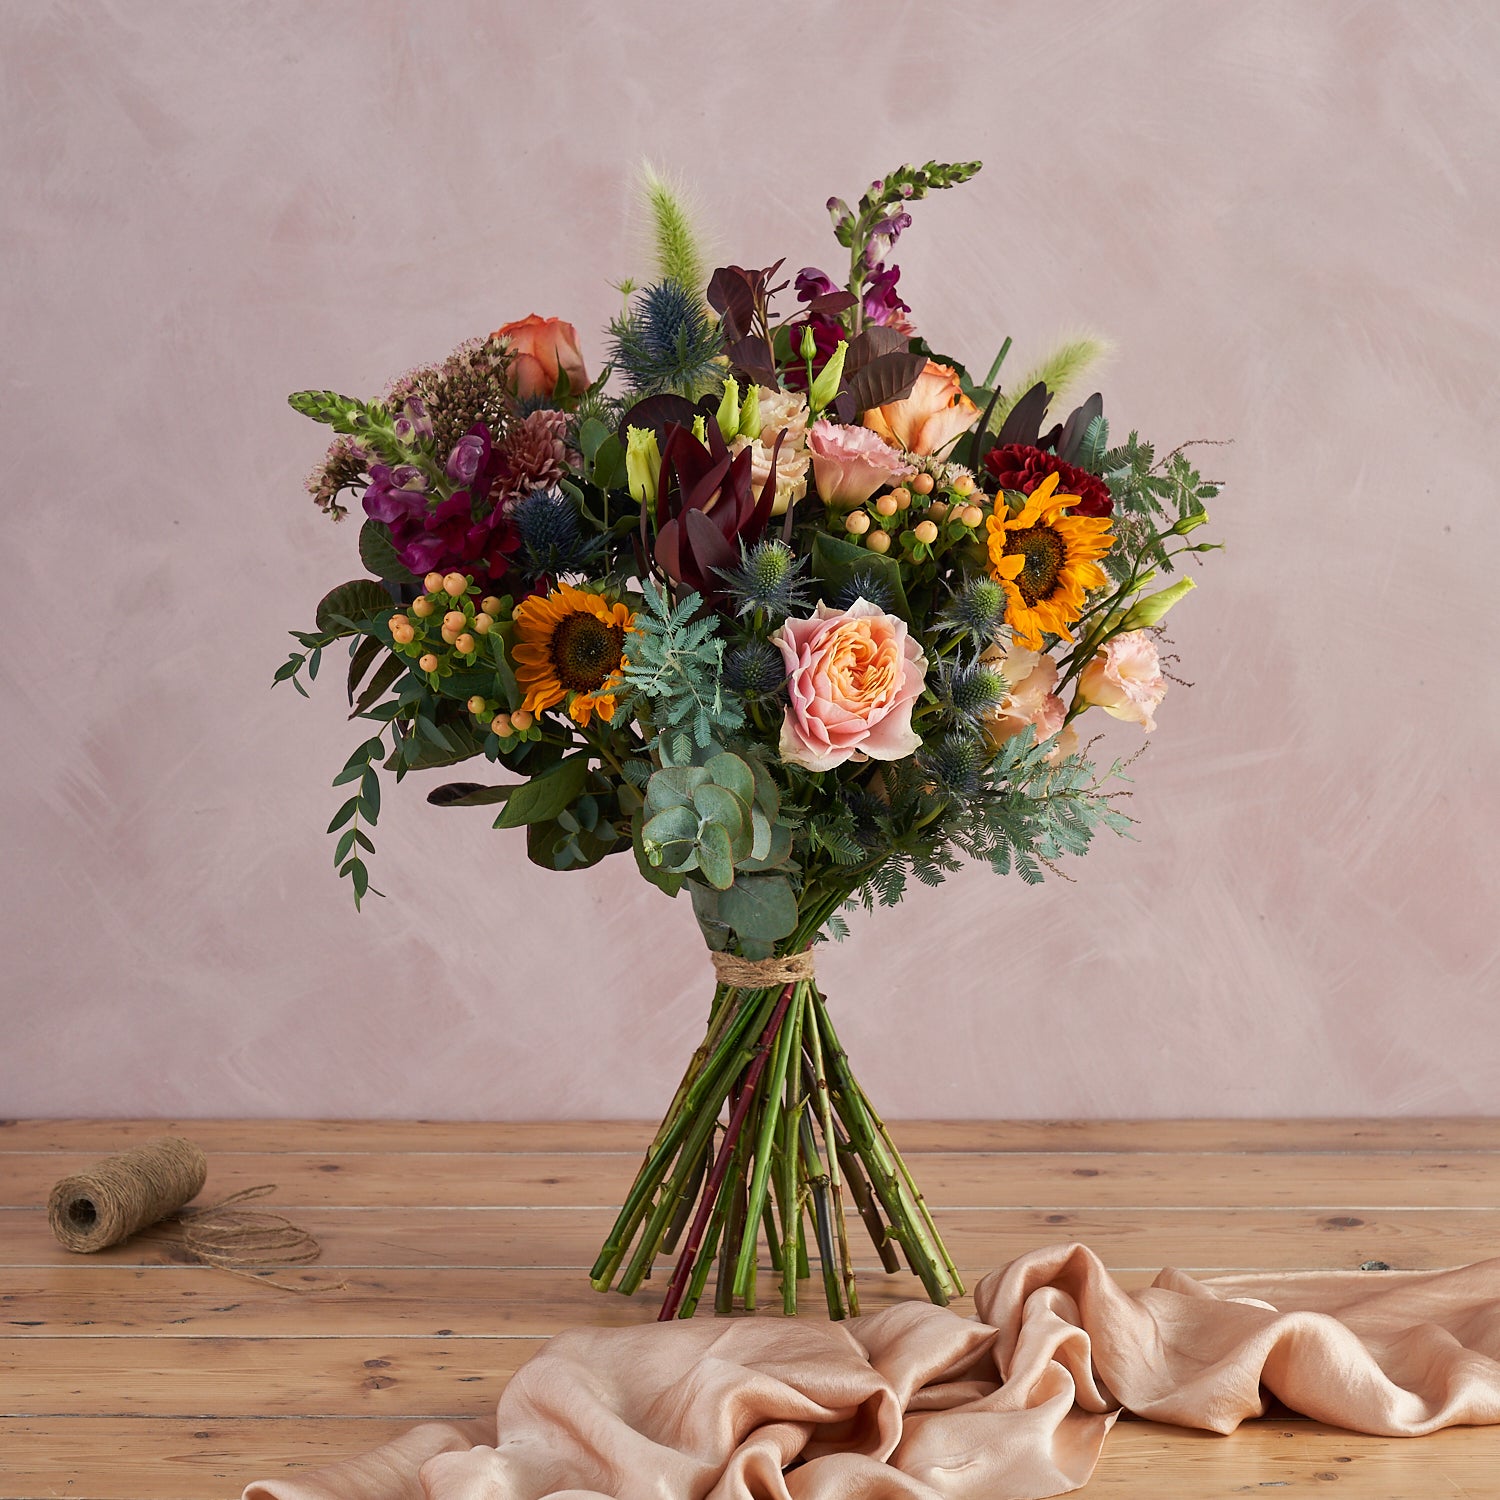 autumn fresh flowers bouquet with sunflowers, garden roses and thistles